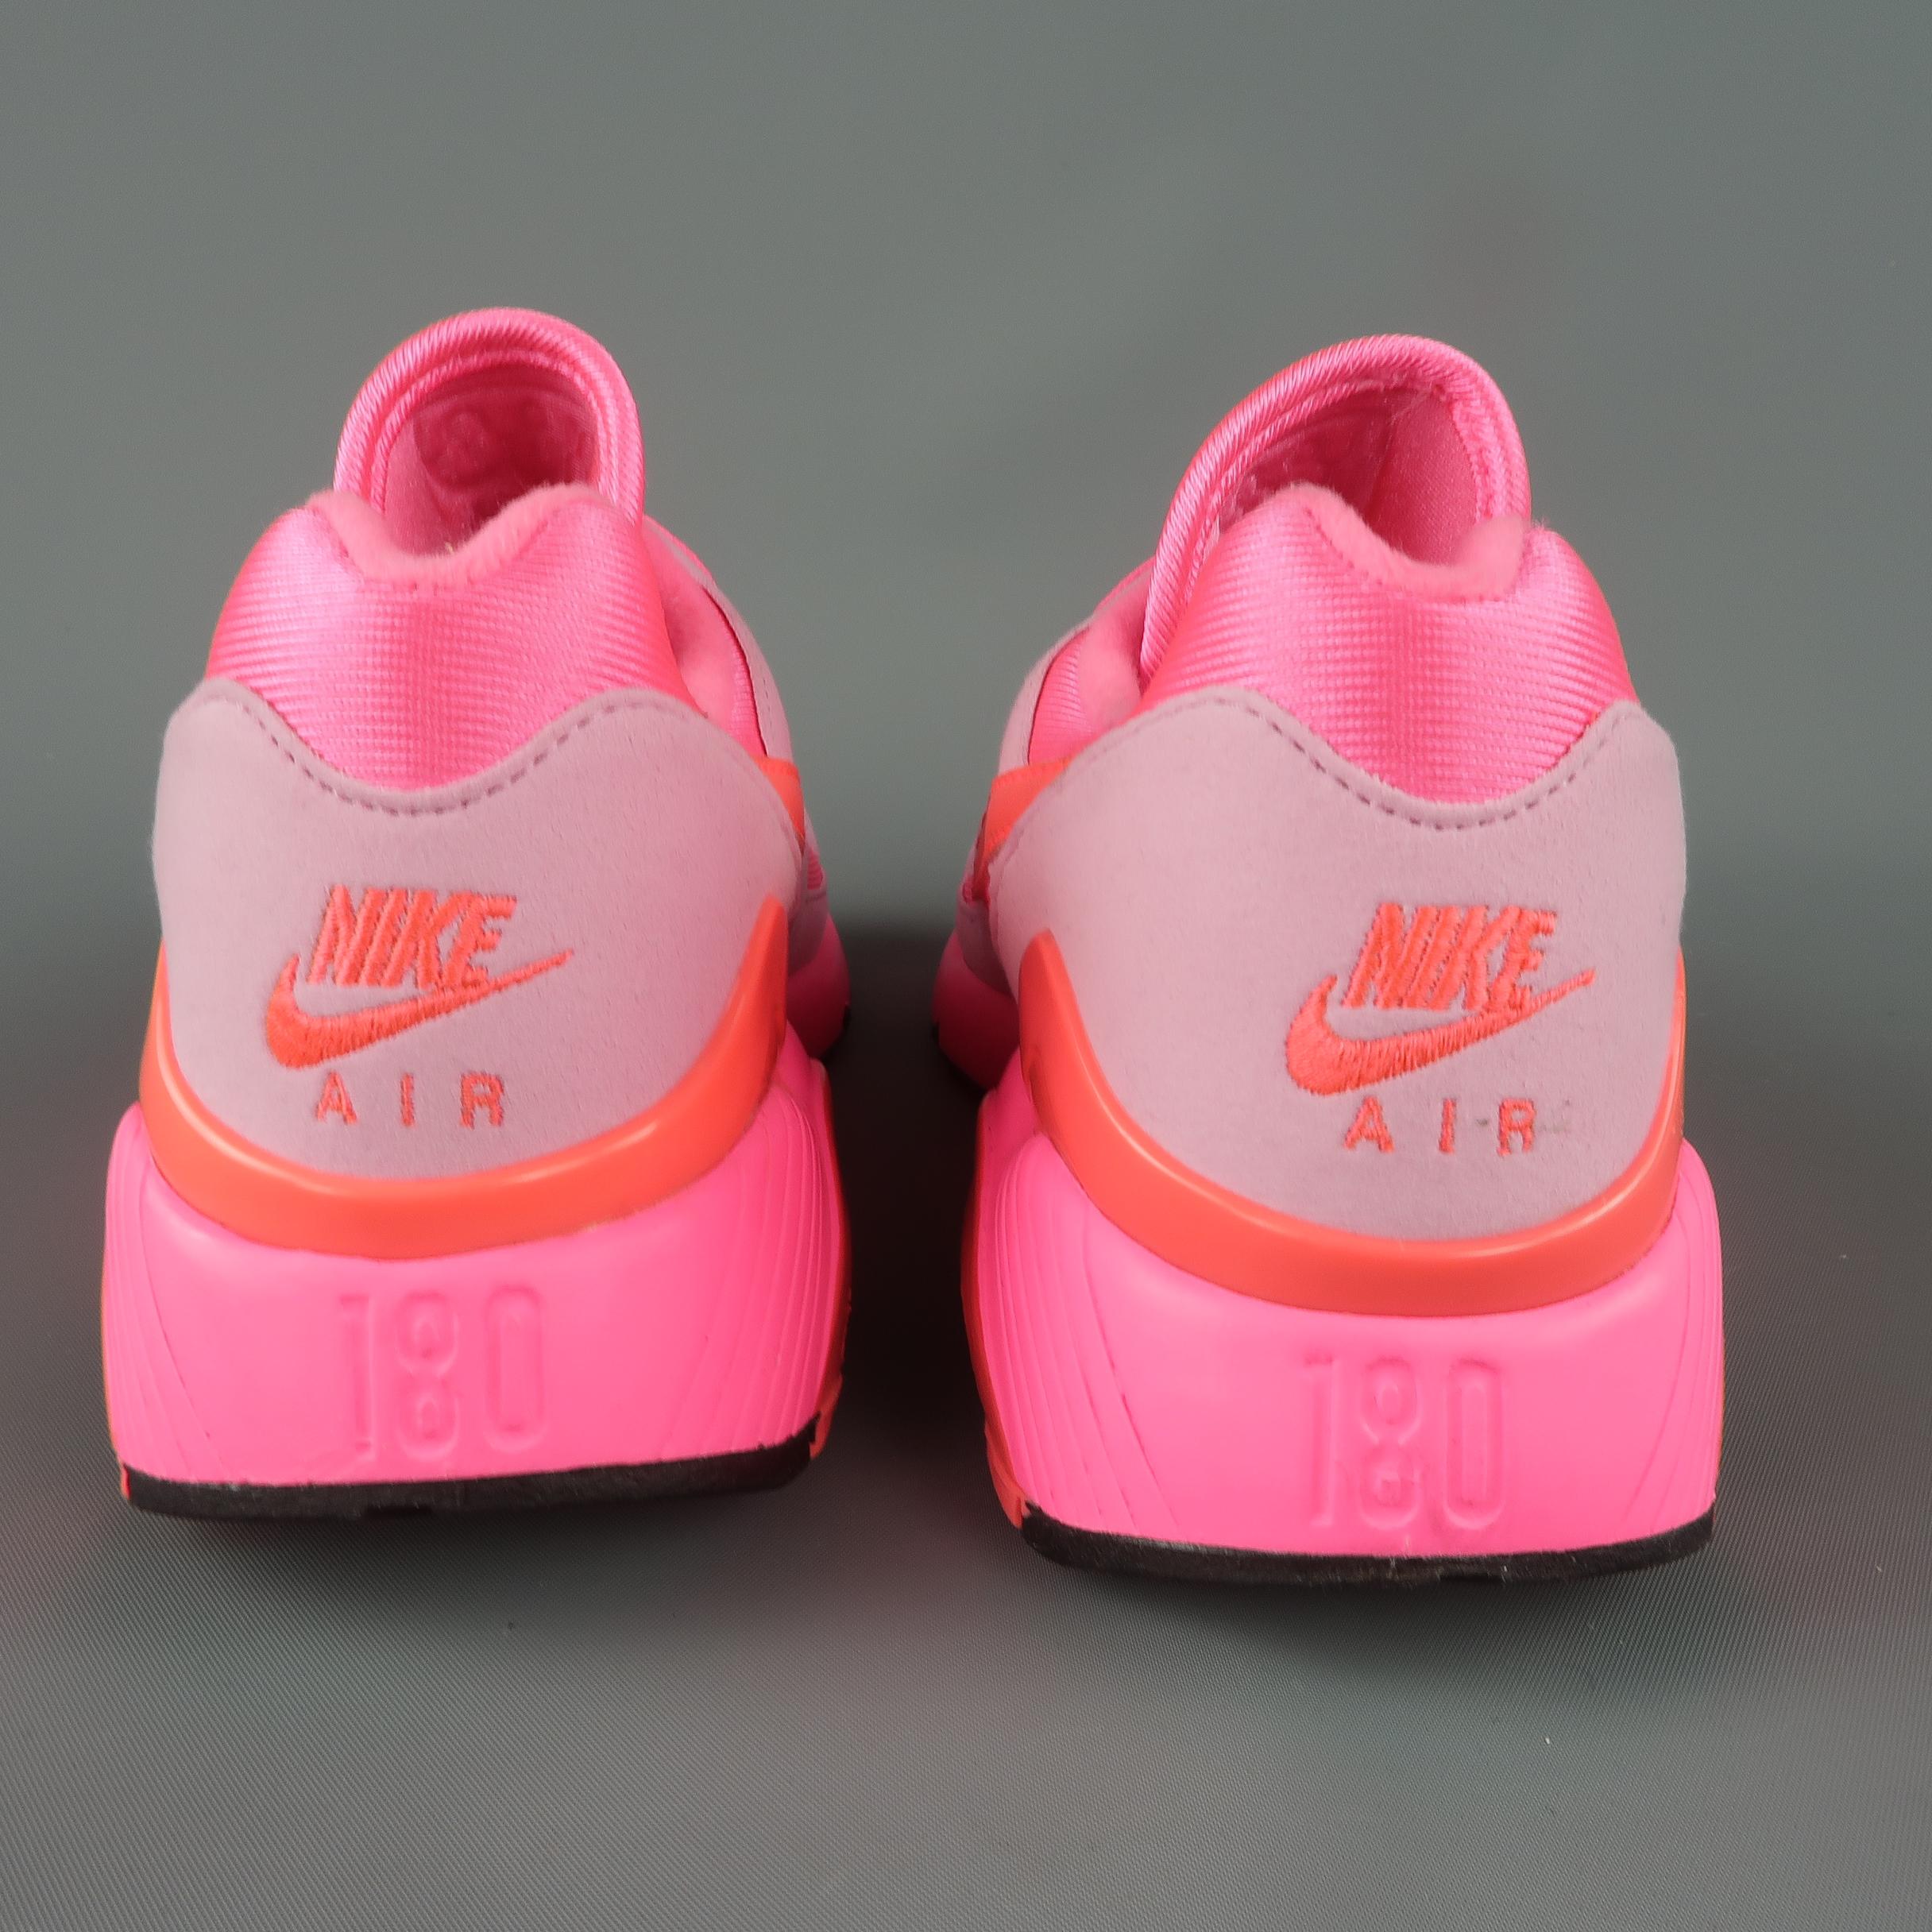 COMME des GARCONS Nike Size 5.5 Neon Pink Nylon Air Max 180 Sneakers Trainers 4